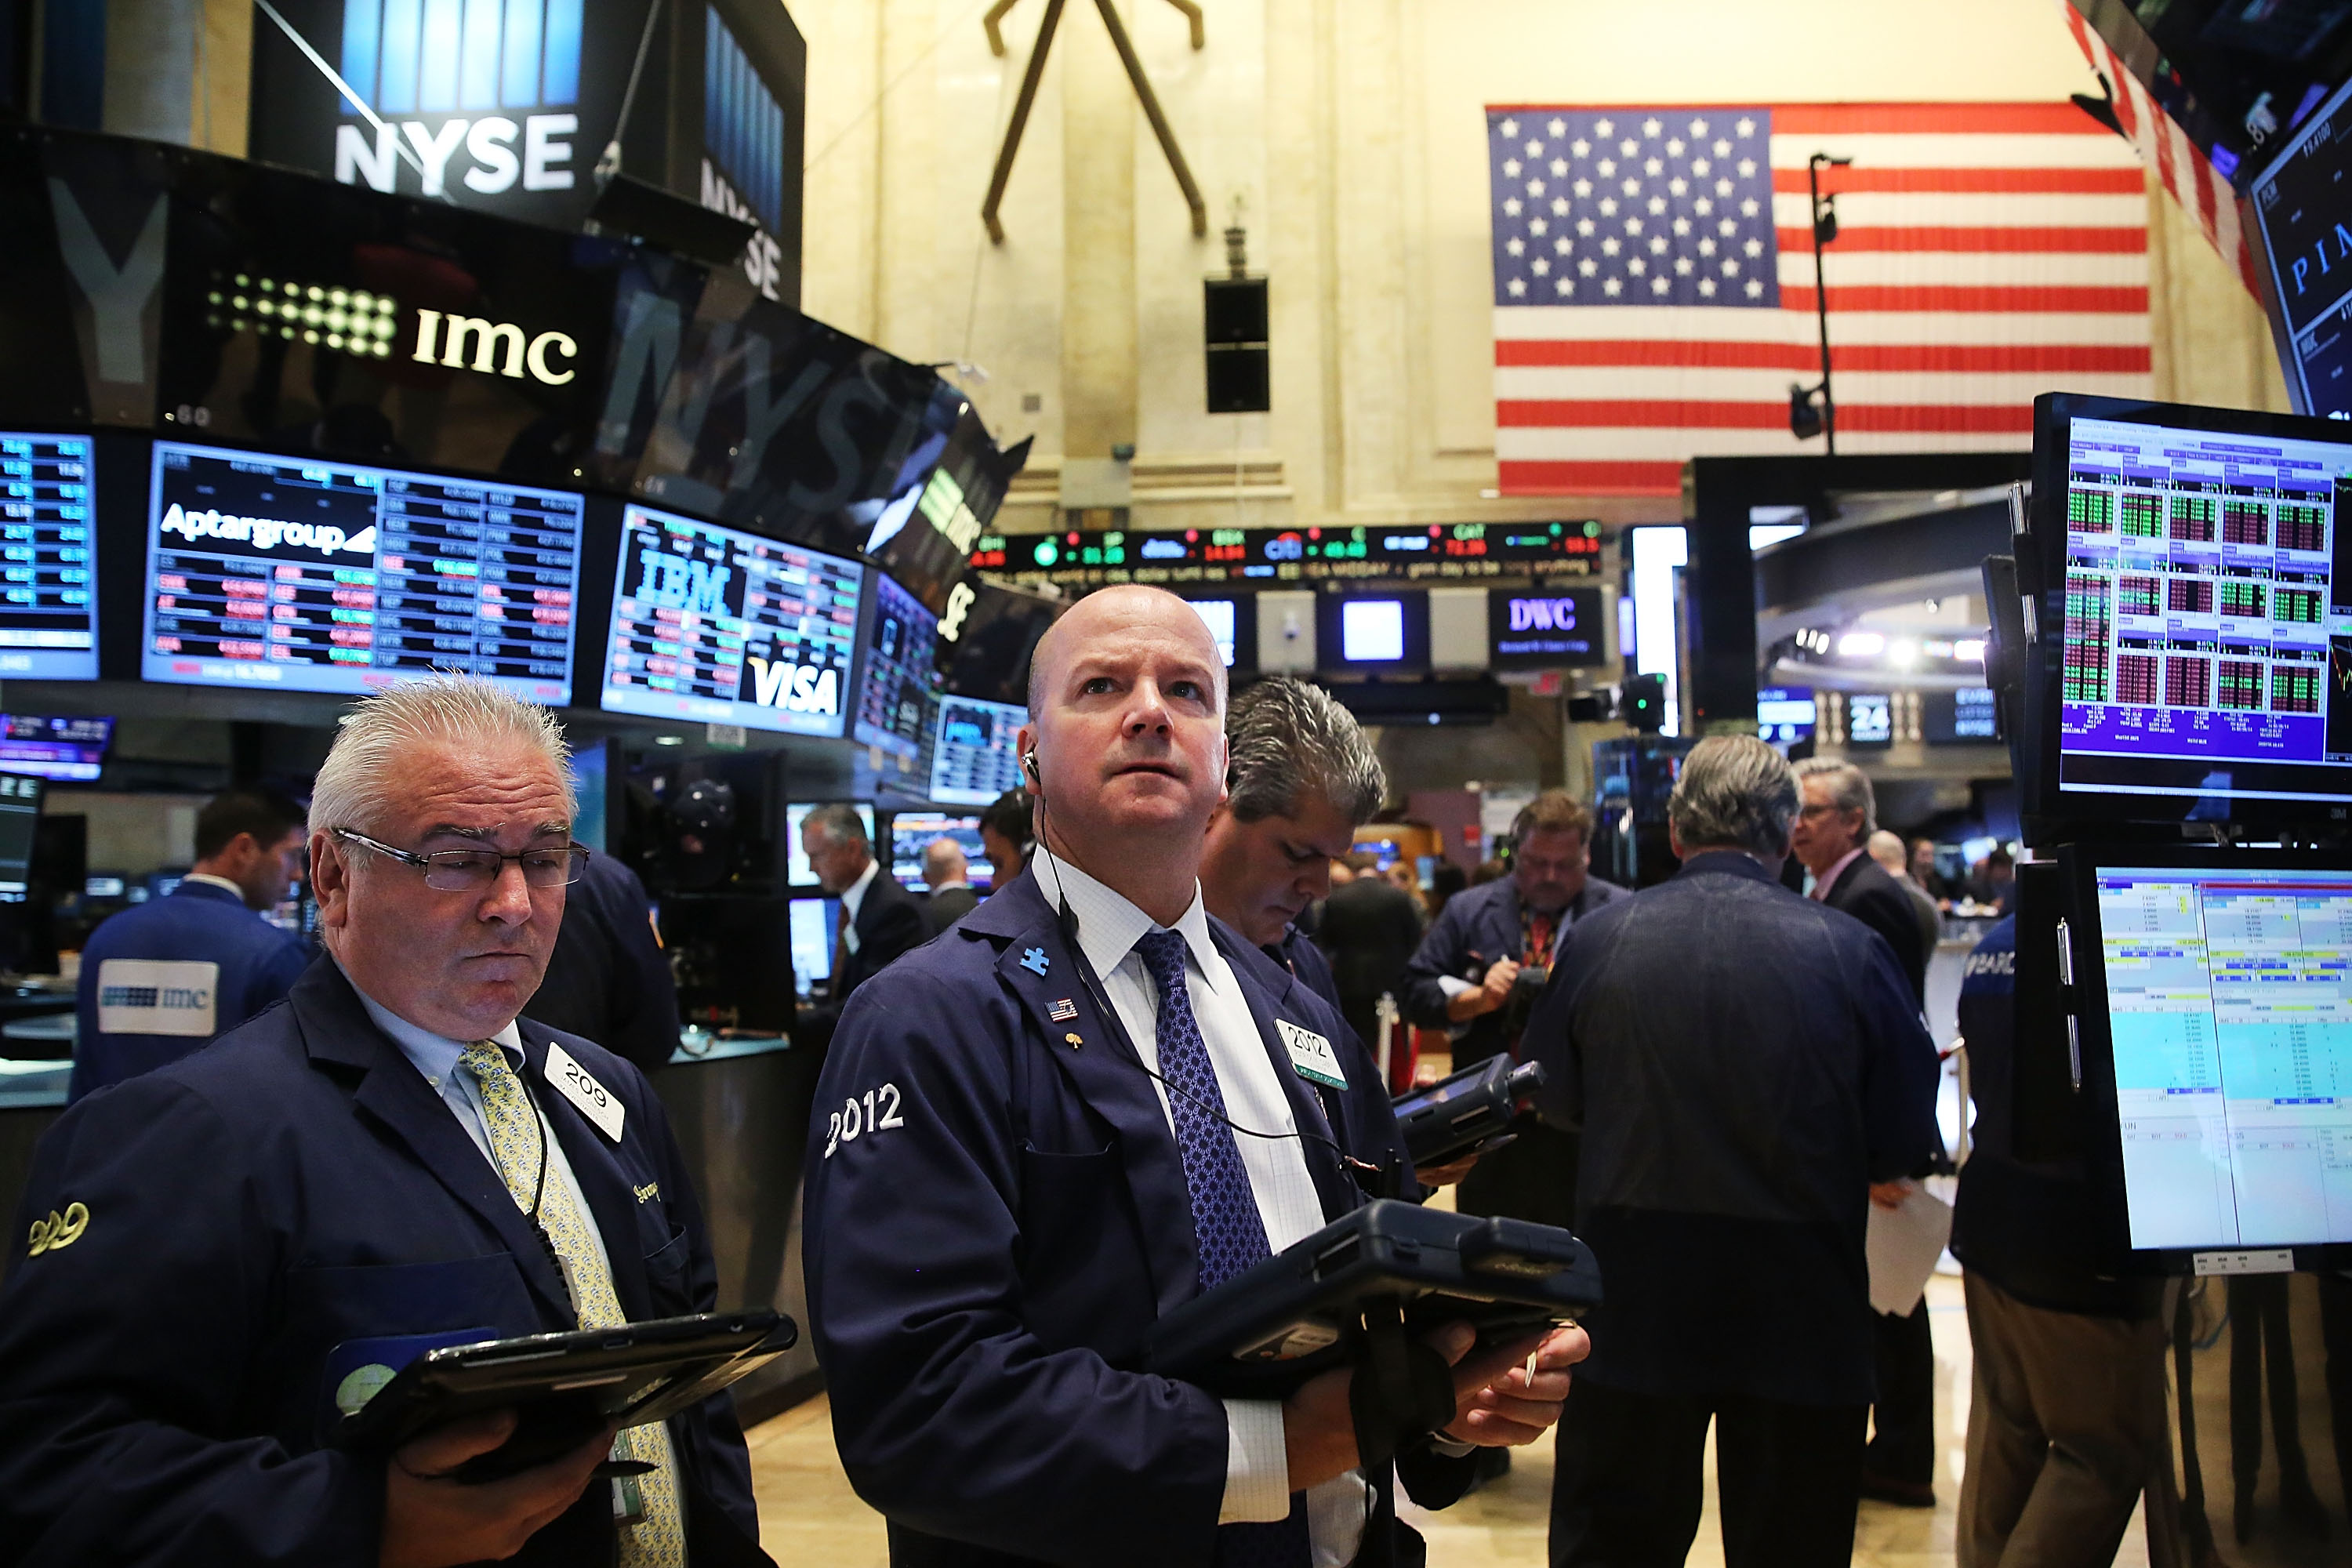 What to Do About the Stock Market Drop